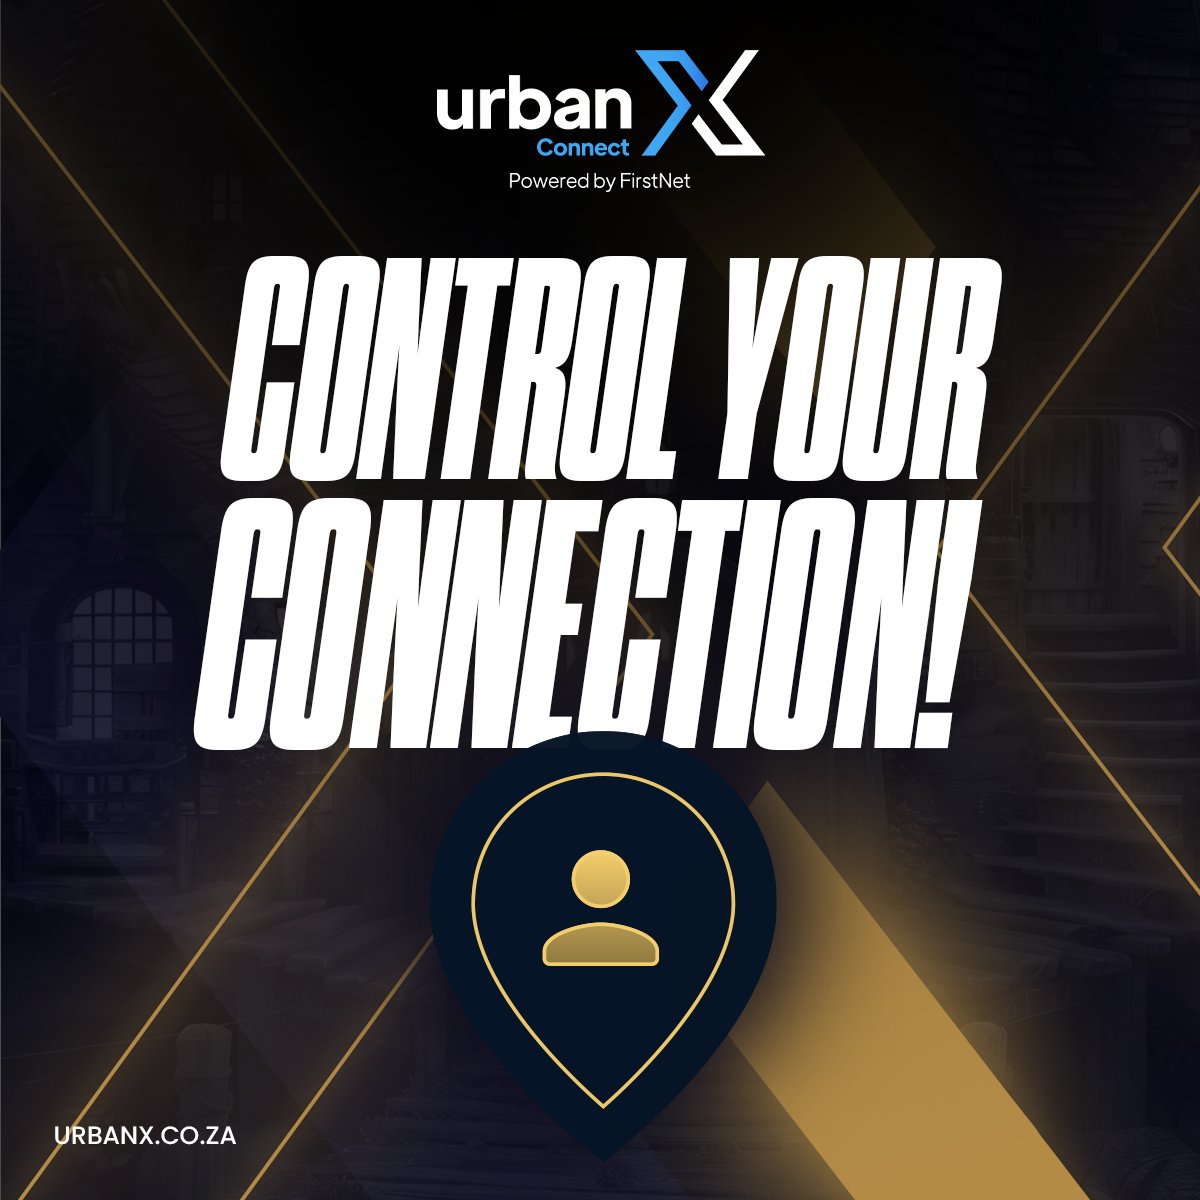 Get ready to level up your gaming experience & control your connection with UrbanX! 🎮

Plan a trip to Urban Island & get all the stats & gear you need to enhance your fibre & game without interruption 💪

Join UrbanX 👉 urbanx.co.za

#UrbanX #ForGamers #UrbanIsland